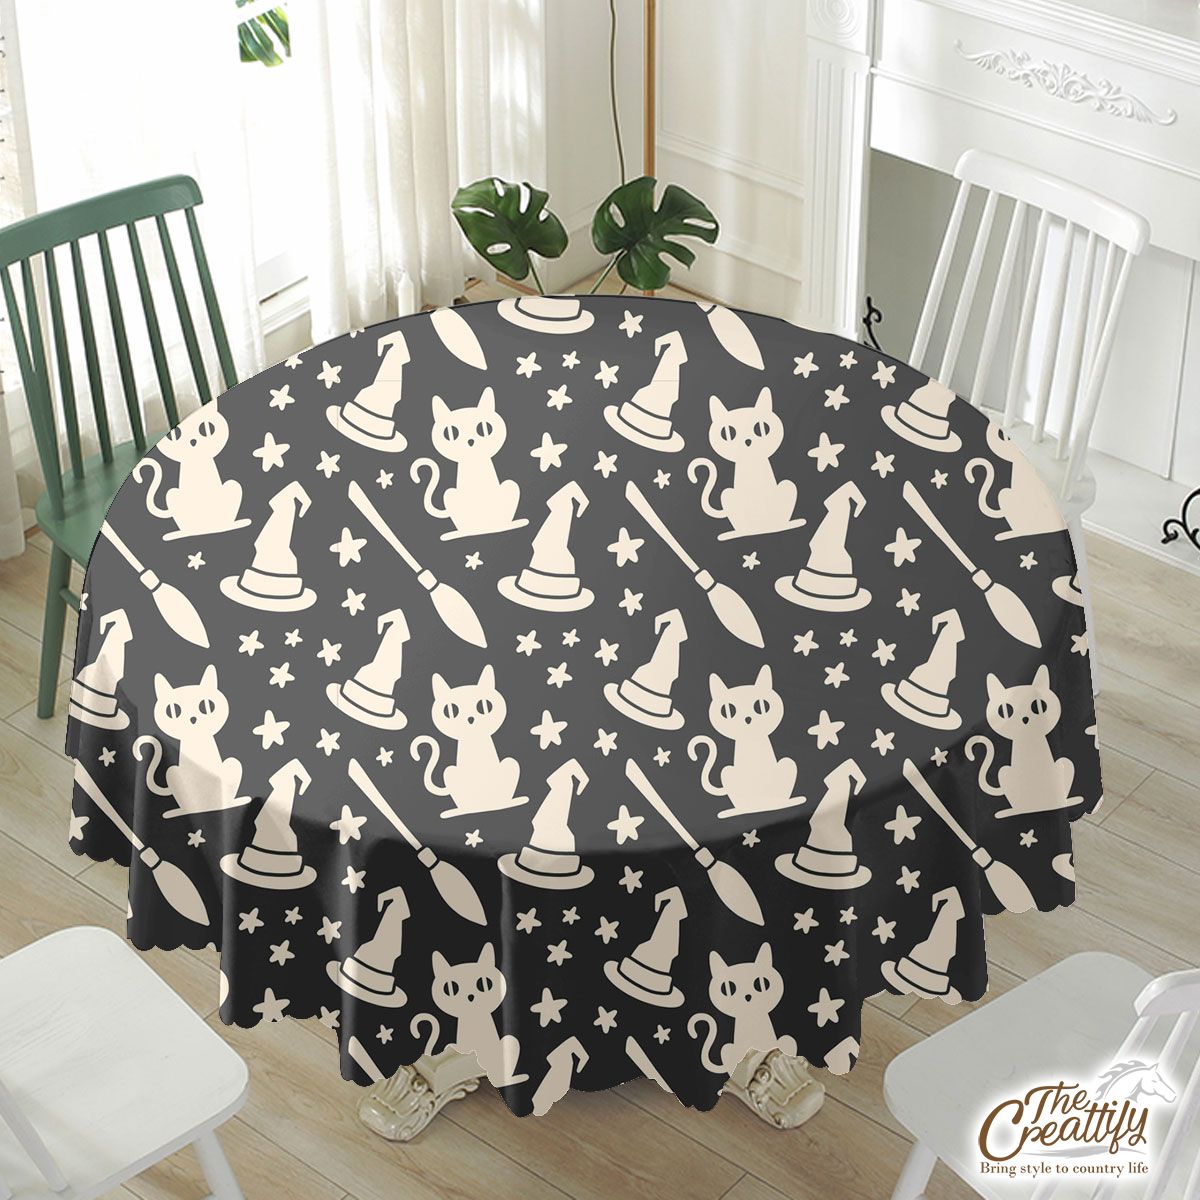 Happy Halloween With Cat, Witch Hat And Broom Waterproof Tablecloth